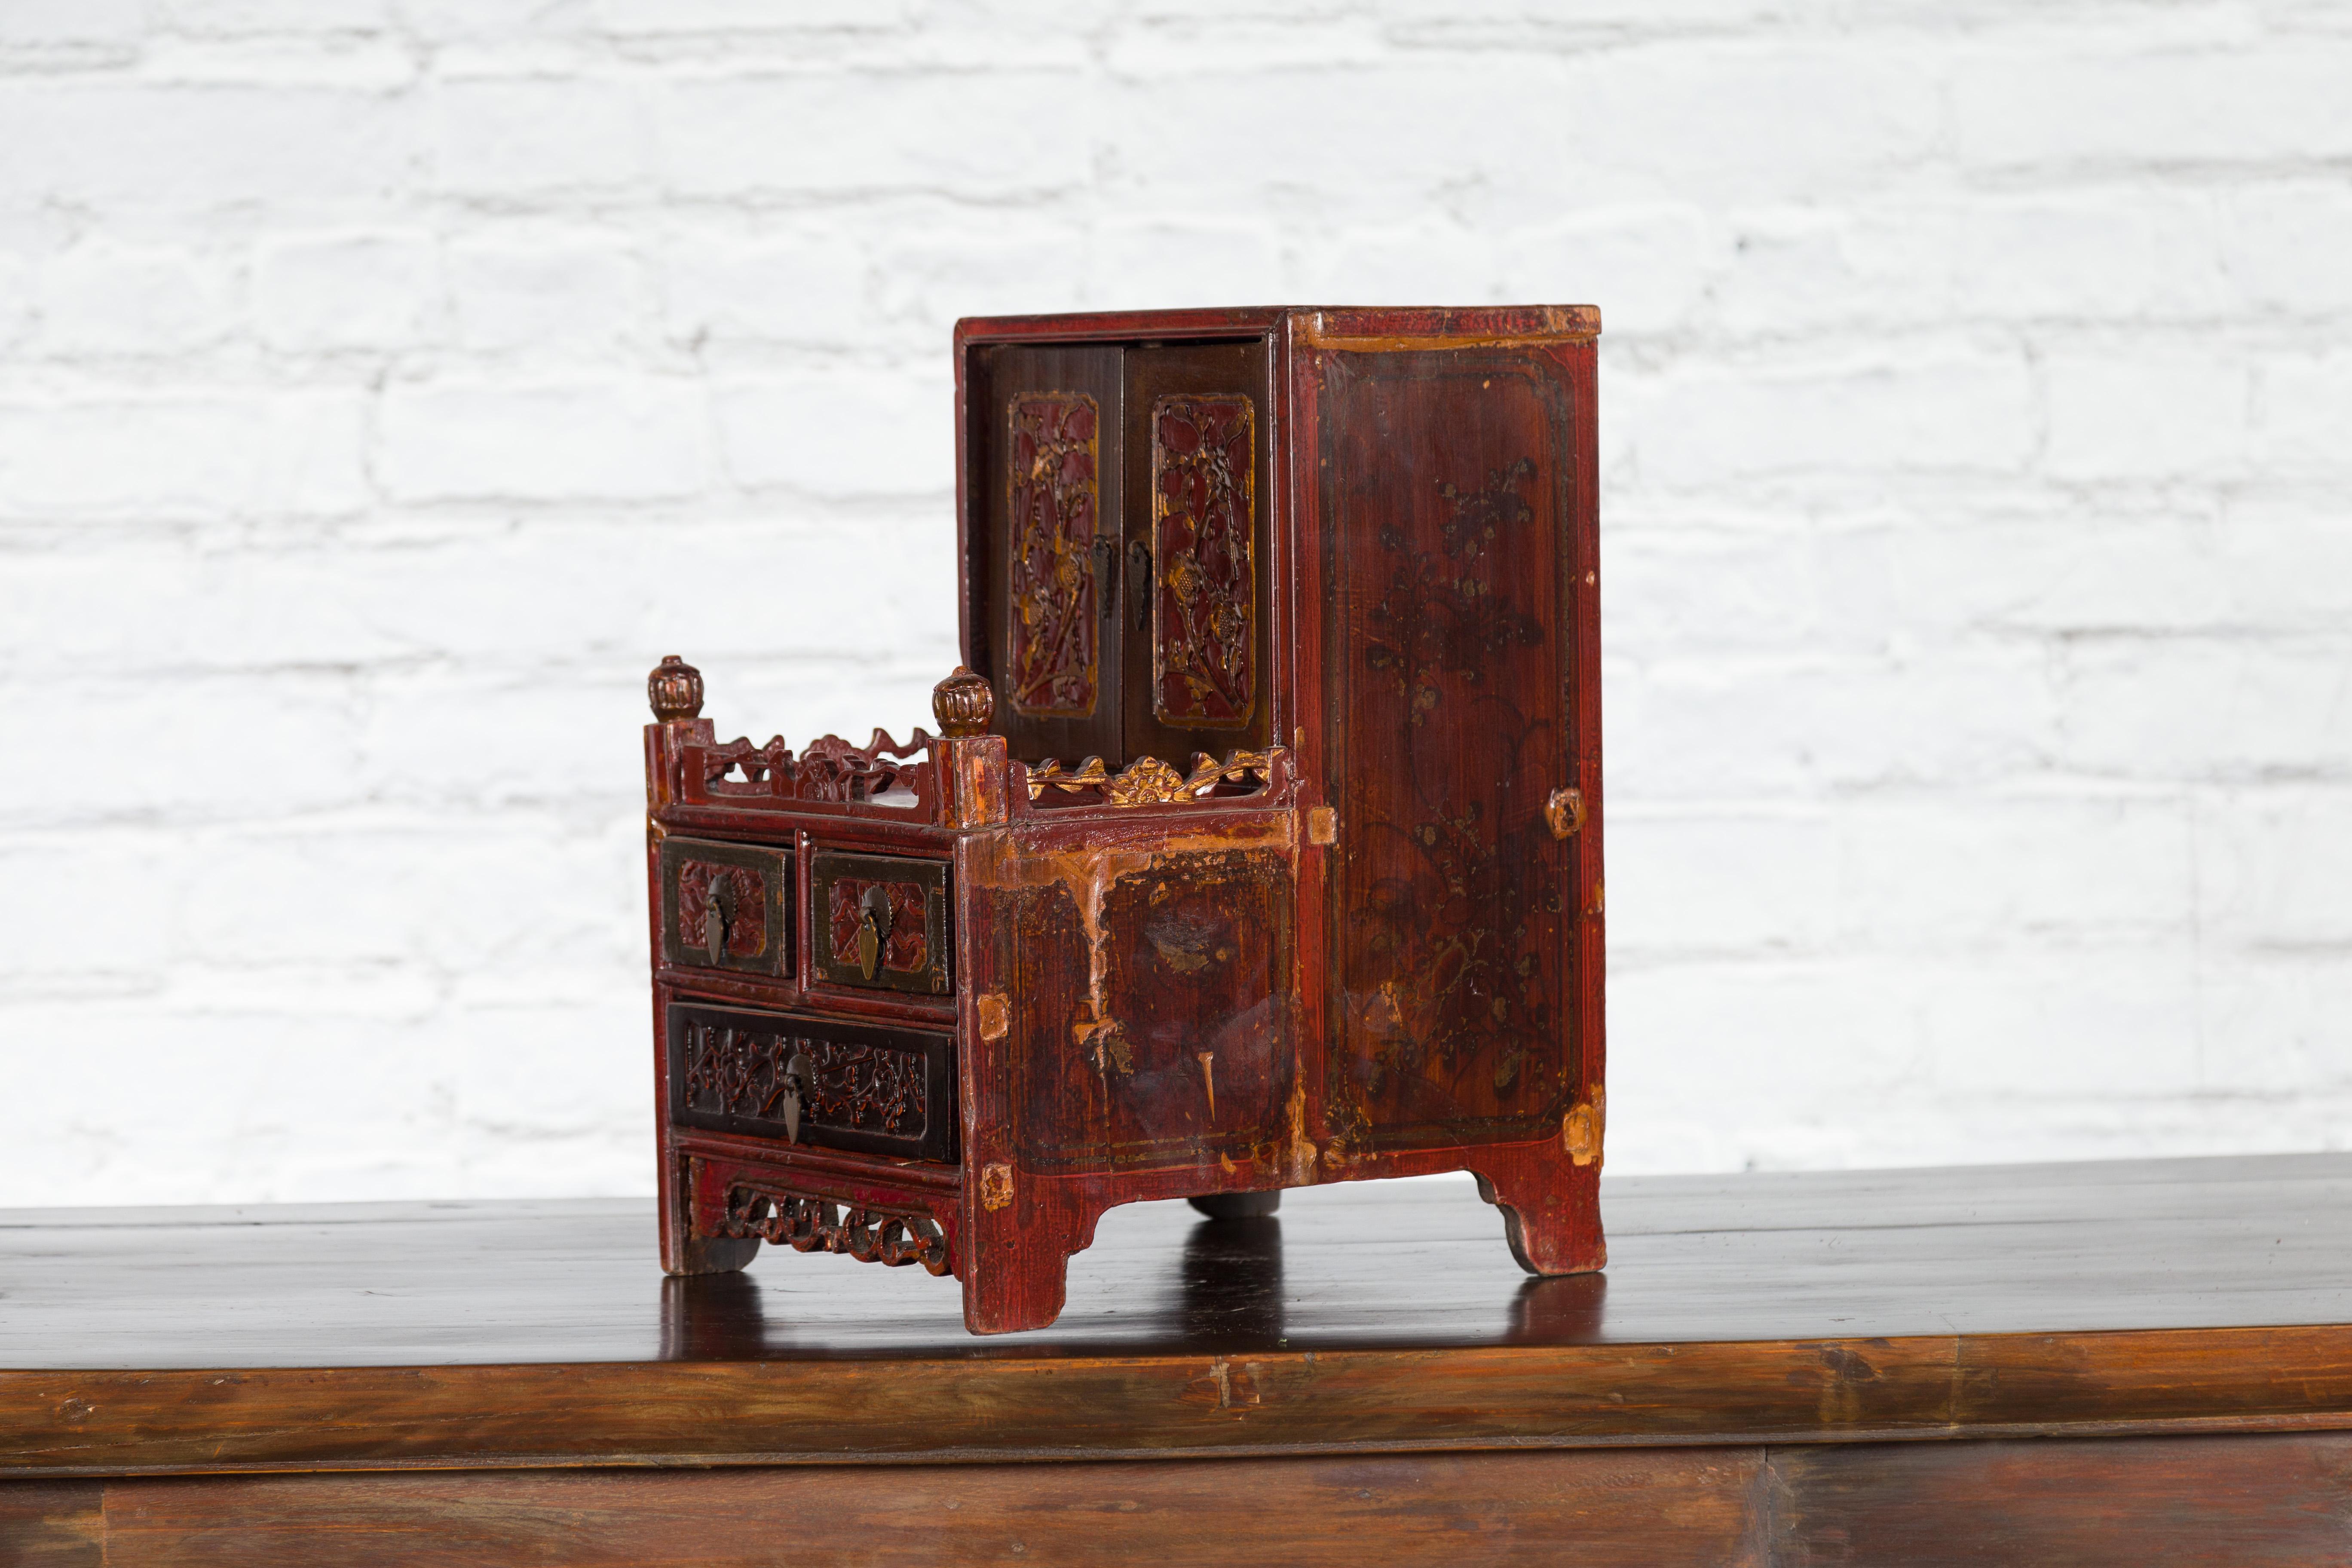 Qing Dynasty 19th Century Red and Brown Lacquer Jewelry Box with Carved Foliage For Sale 10